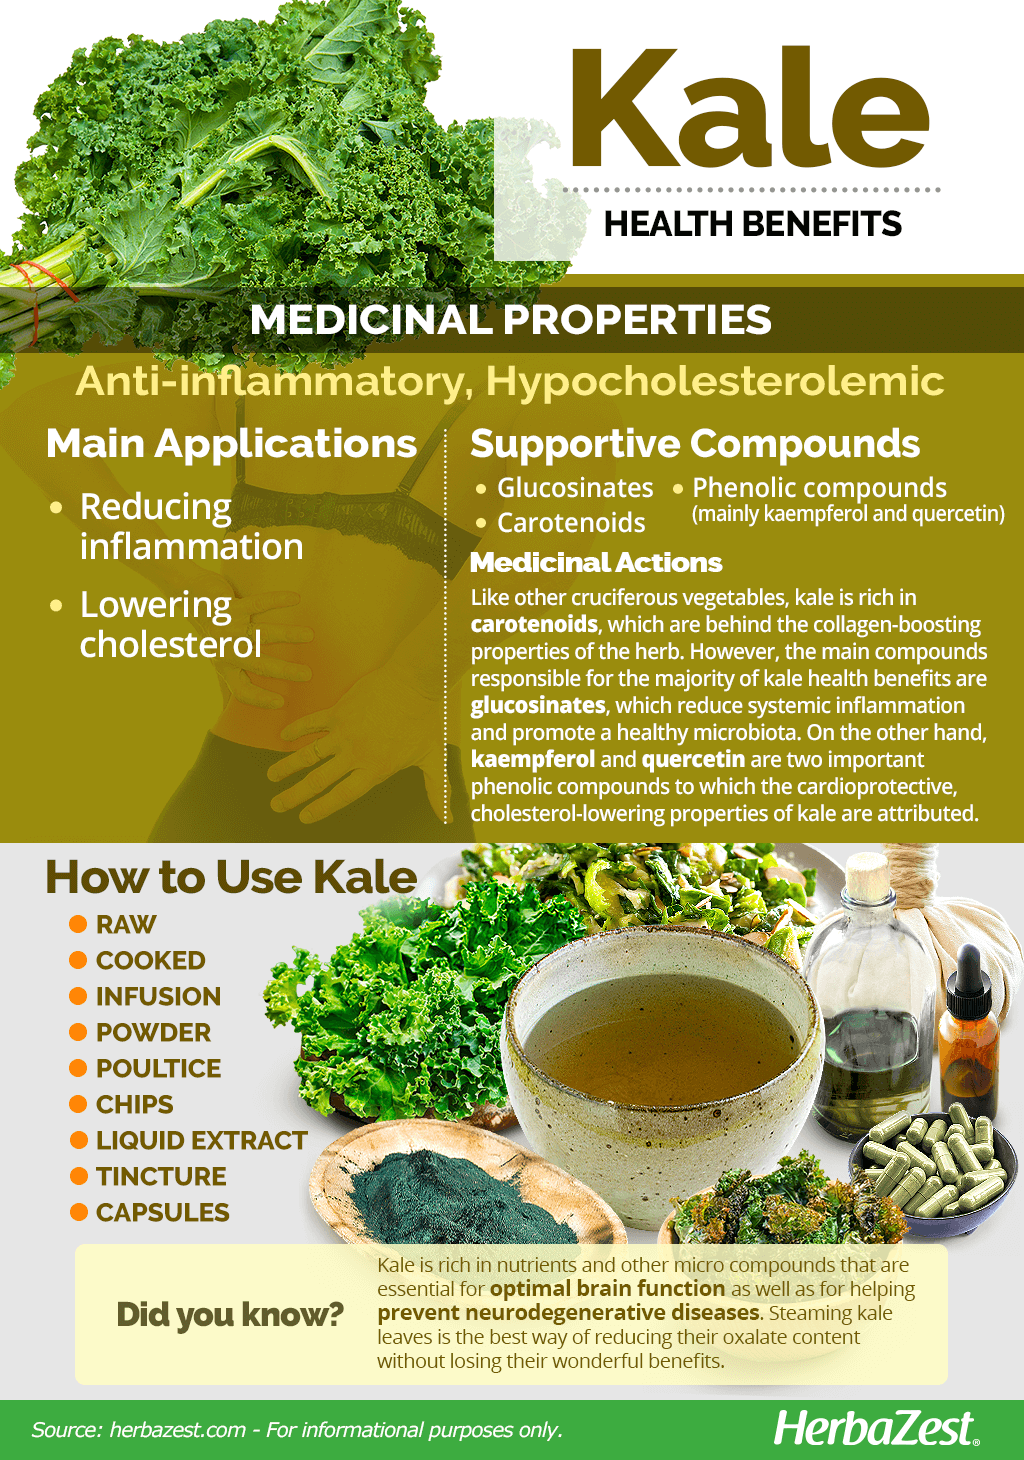 All About Kale